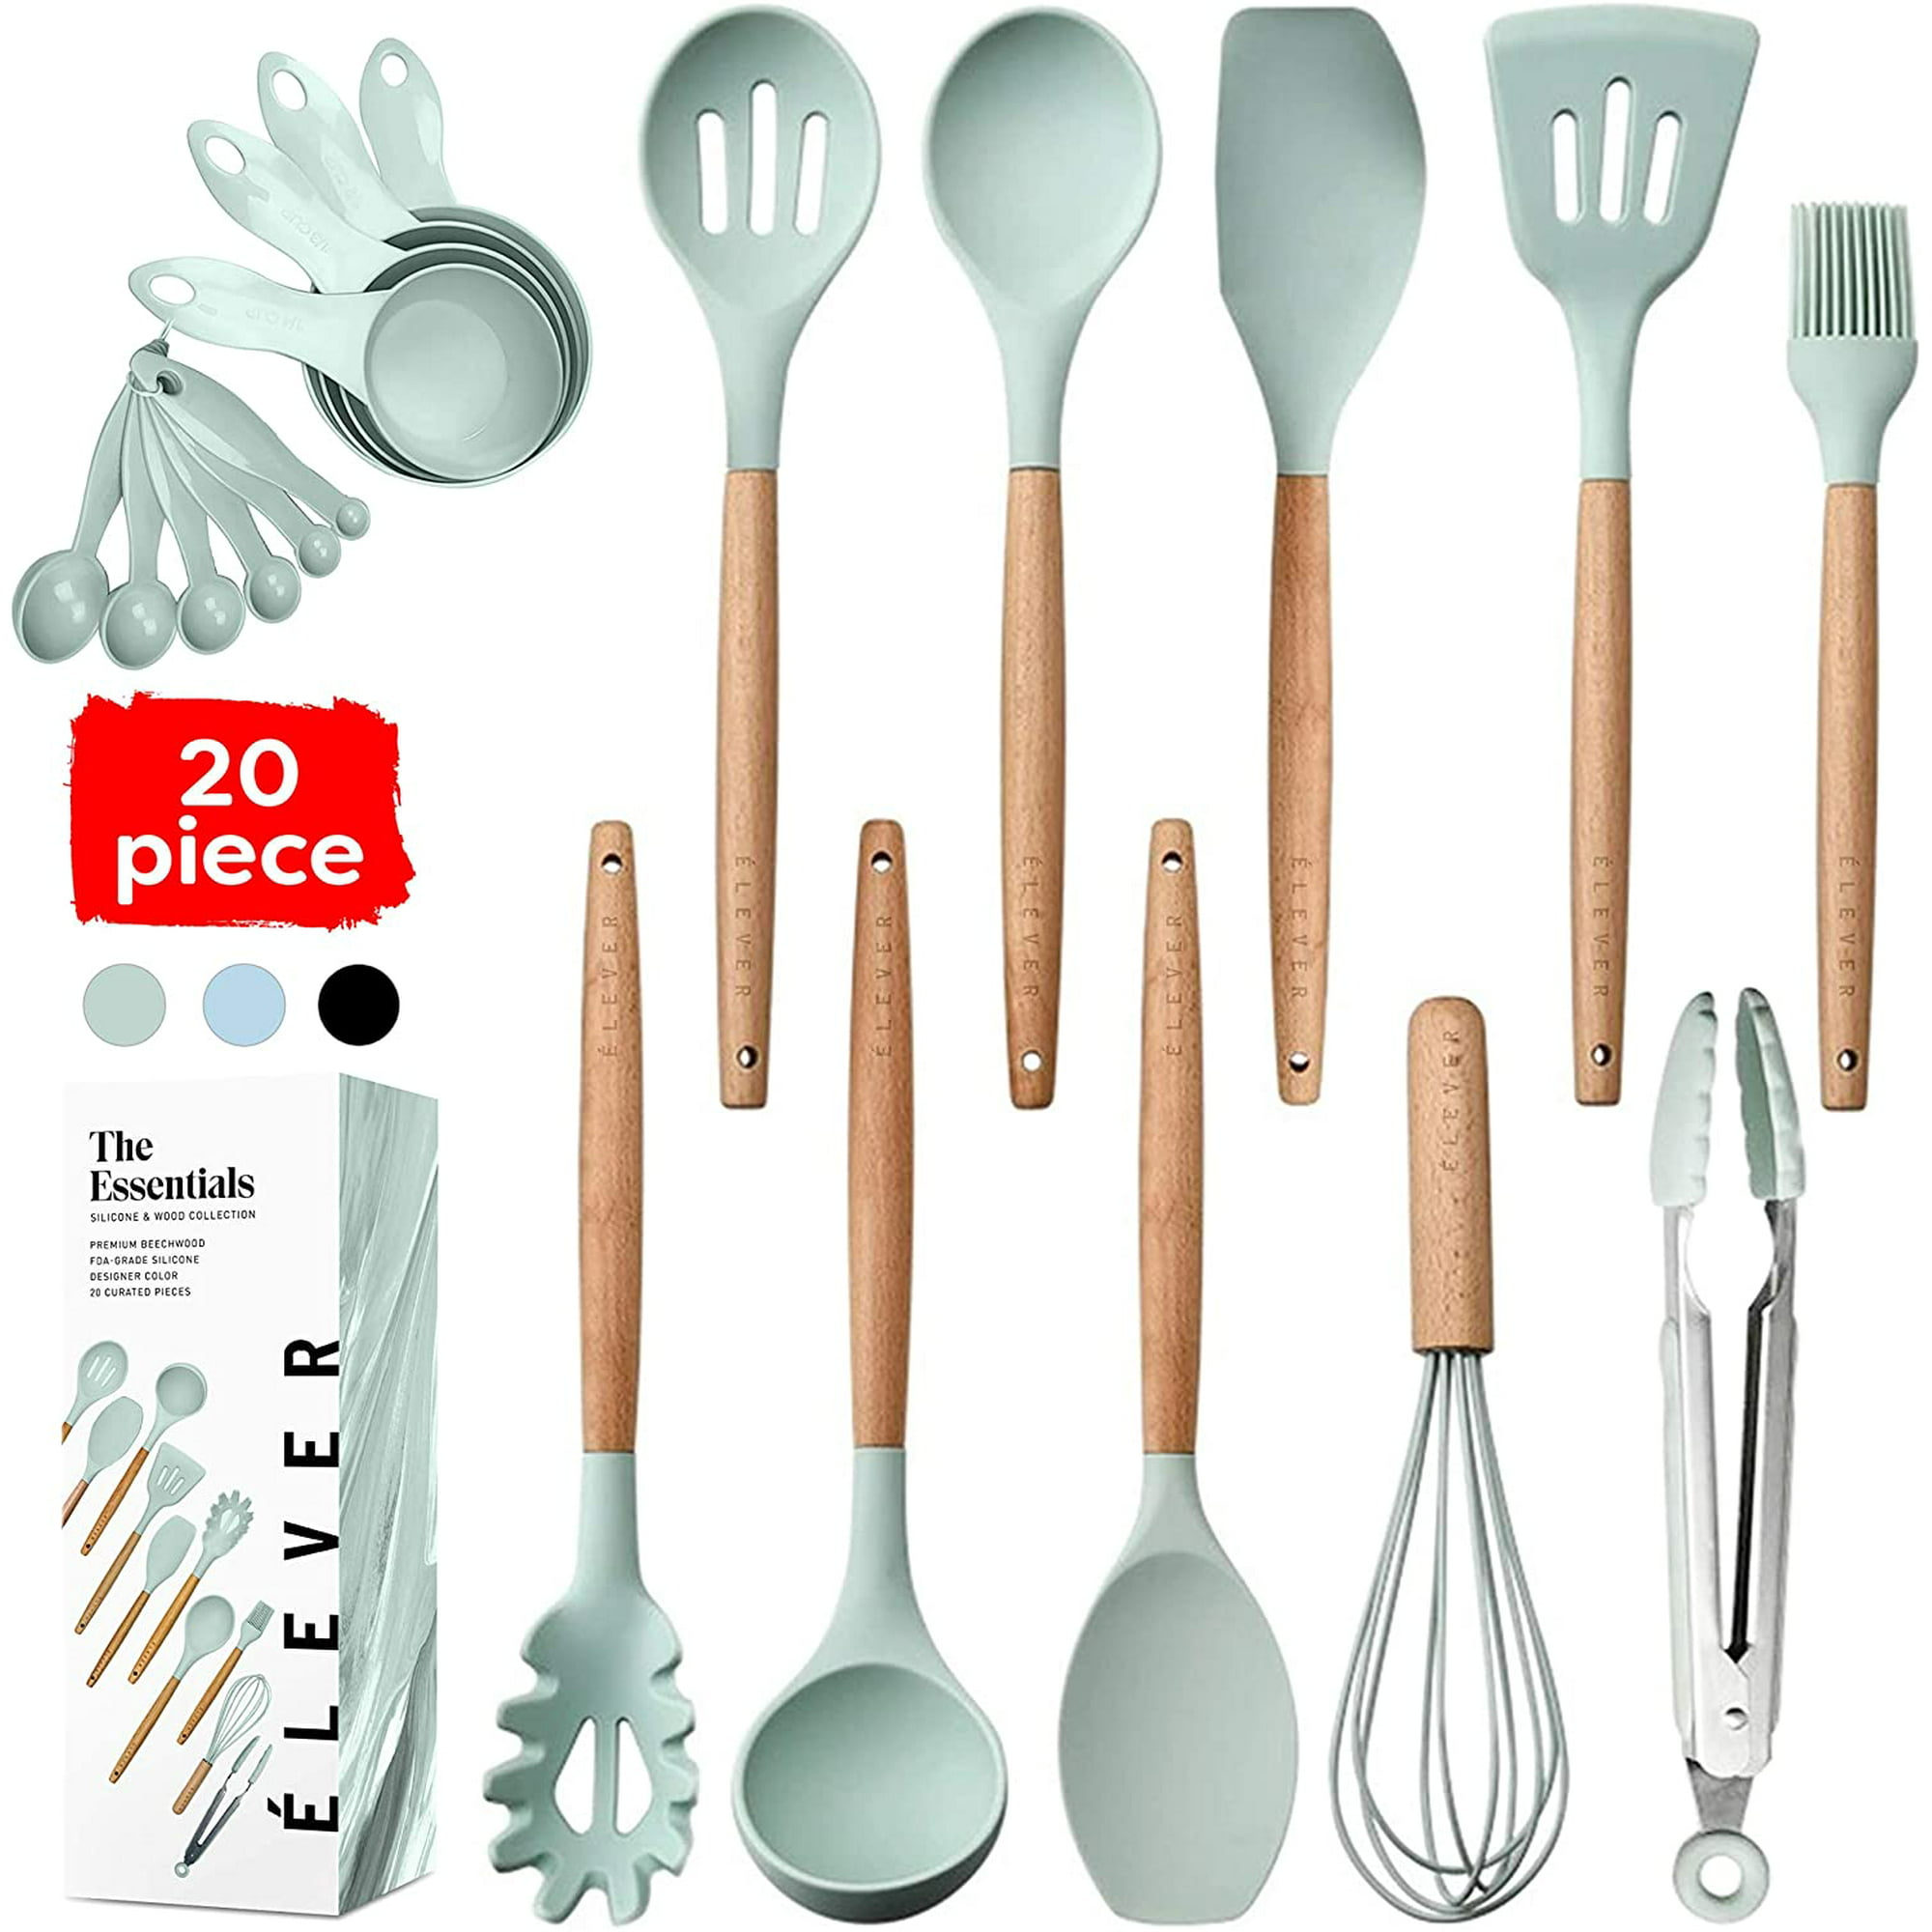 8pcs Green Natural Beech Wooden Silicone Kitchen Utensils Set Silicone Utensil  Cooking Set Buy Set Of Silicone Kitchen Utensils 12-inch Green,Funny Kitchen  Set Product On | Silicone And Beechwood Kitchen Utensil Set,great